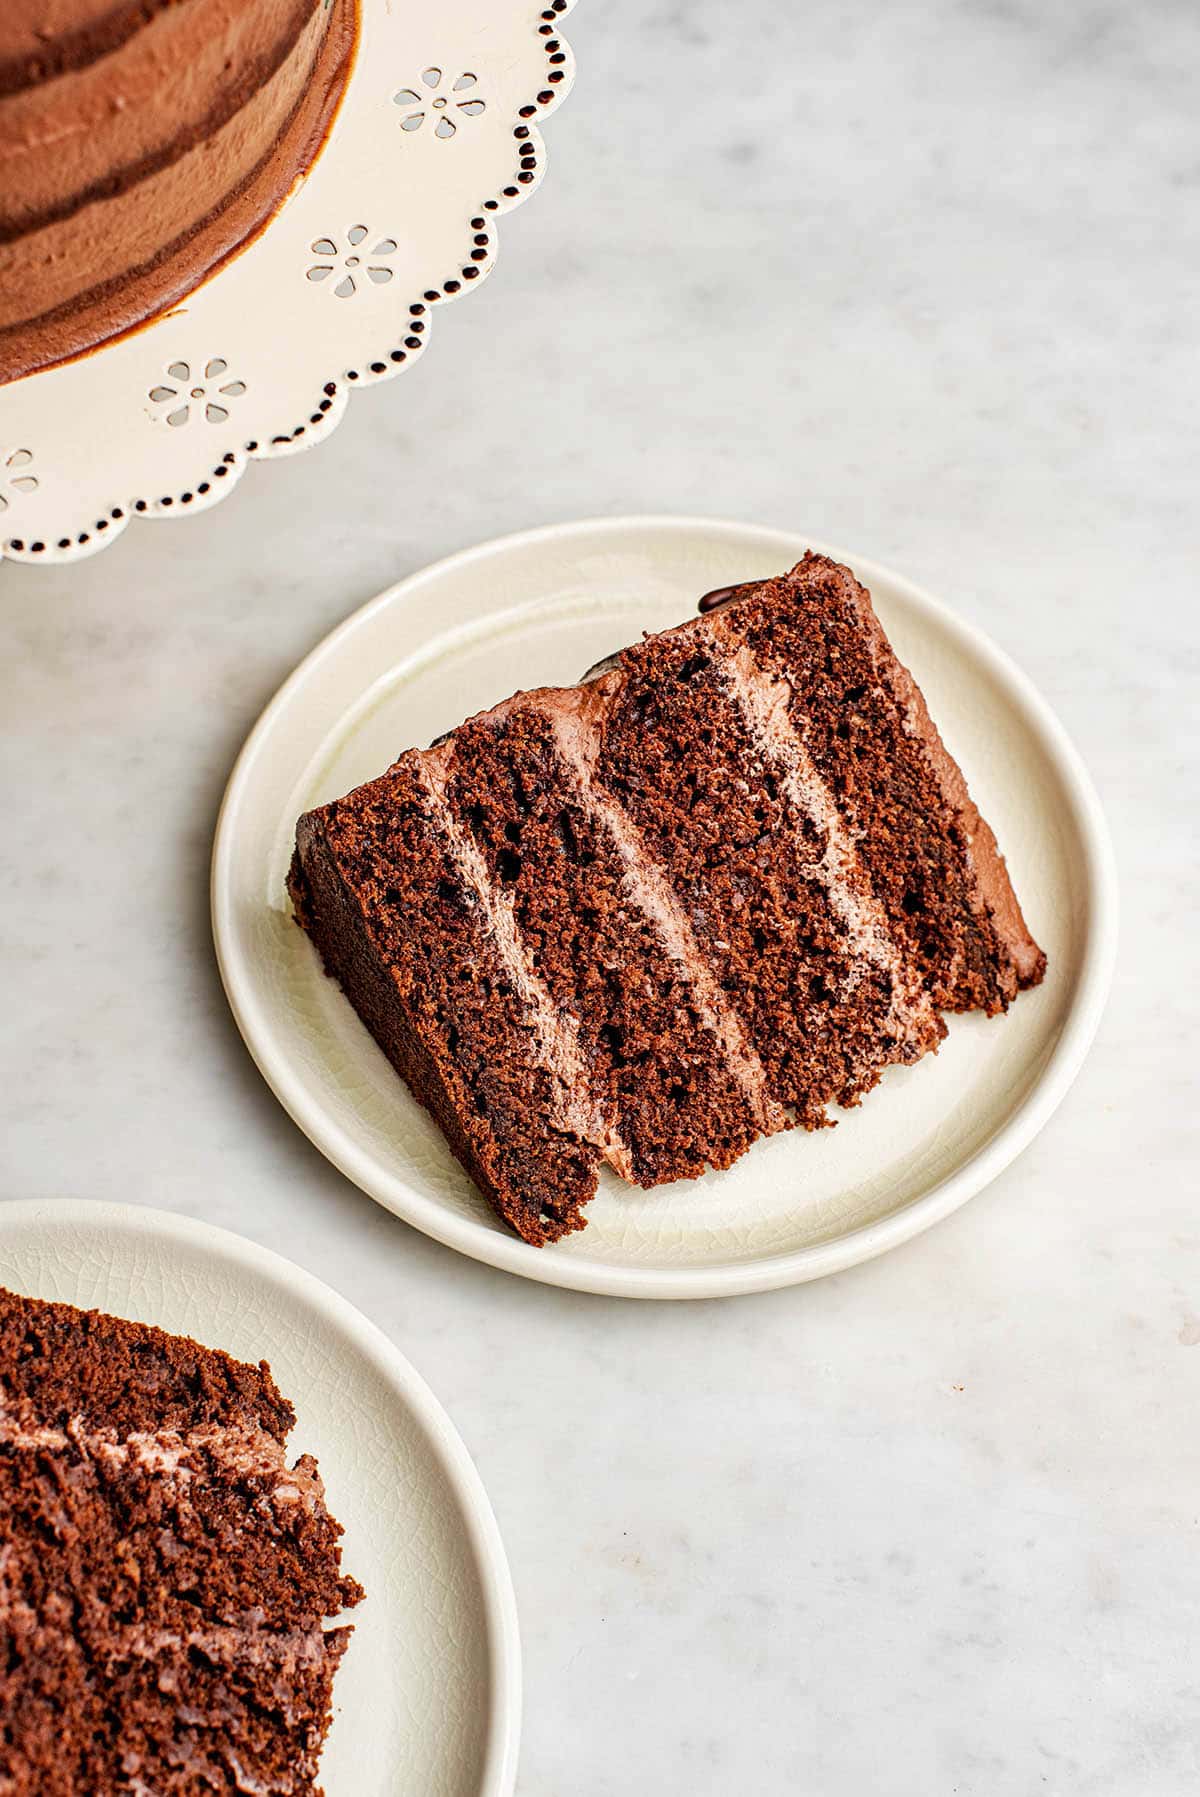 A slice of chocolate layer cake on a plate, with more cake nearby.